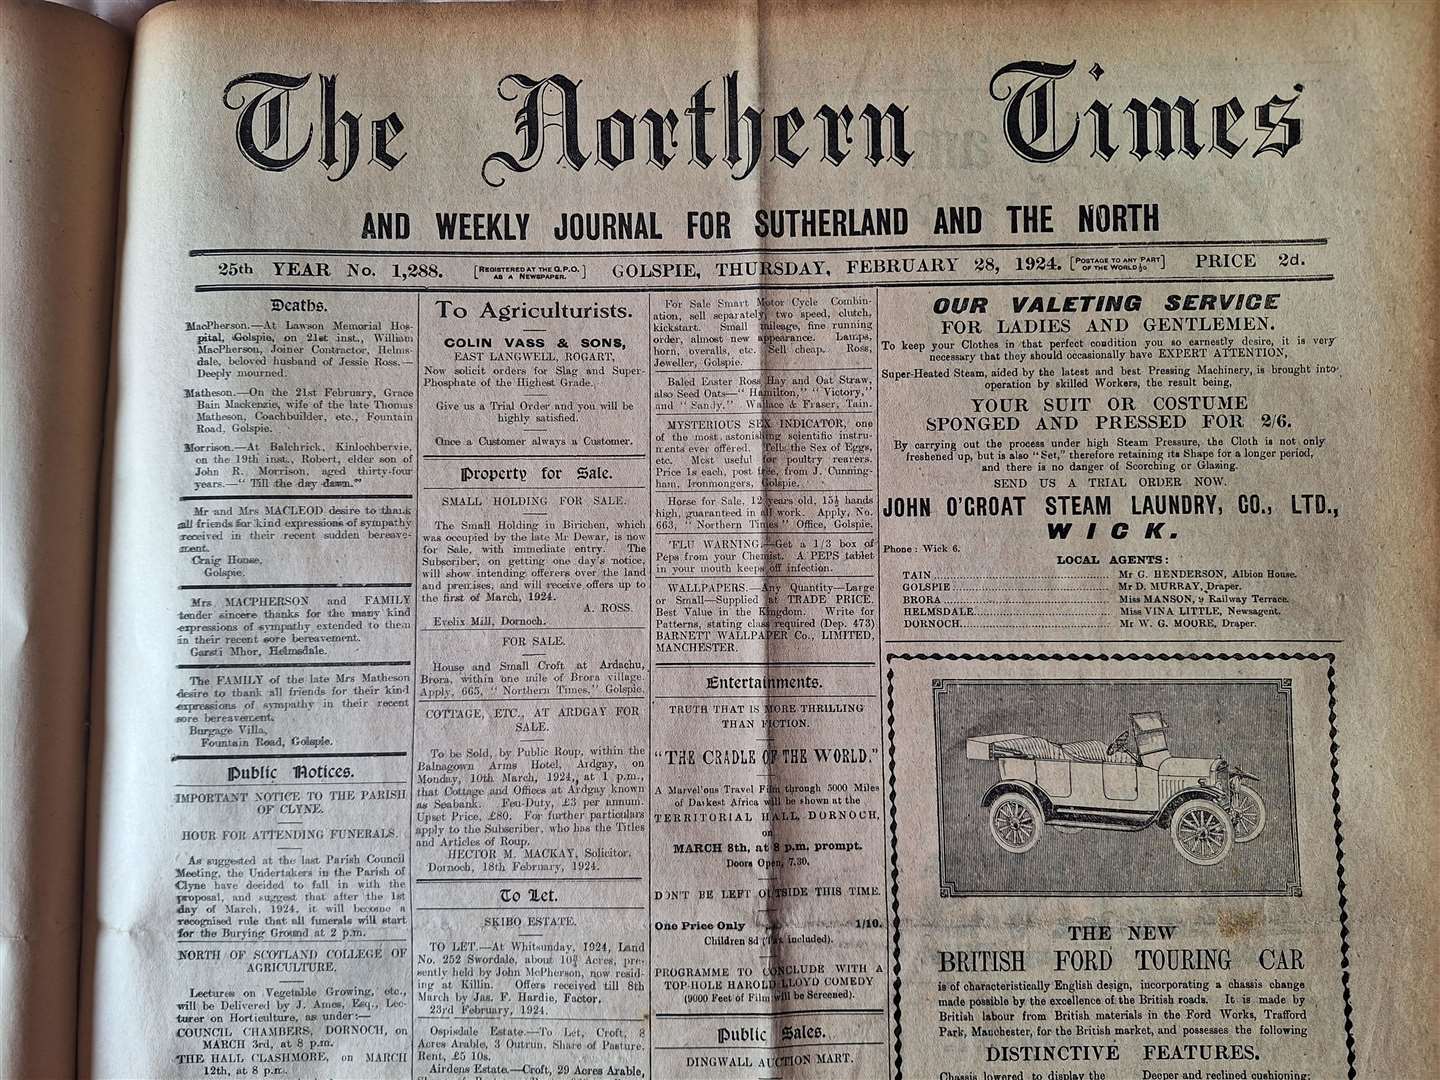 The edition of February 28, 1924.